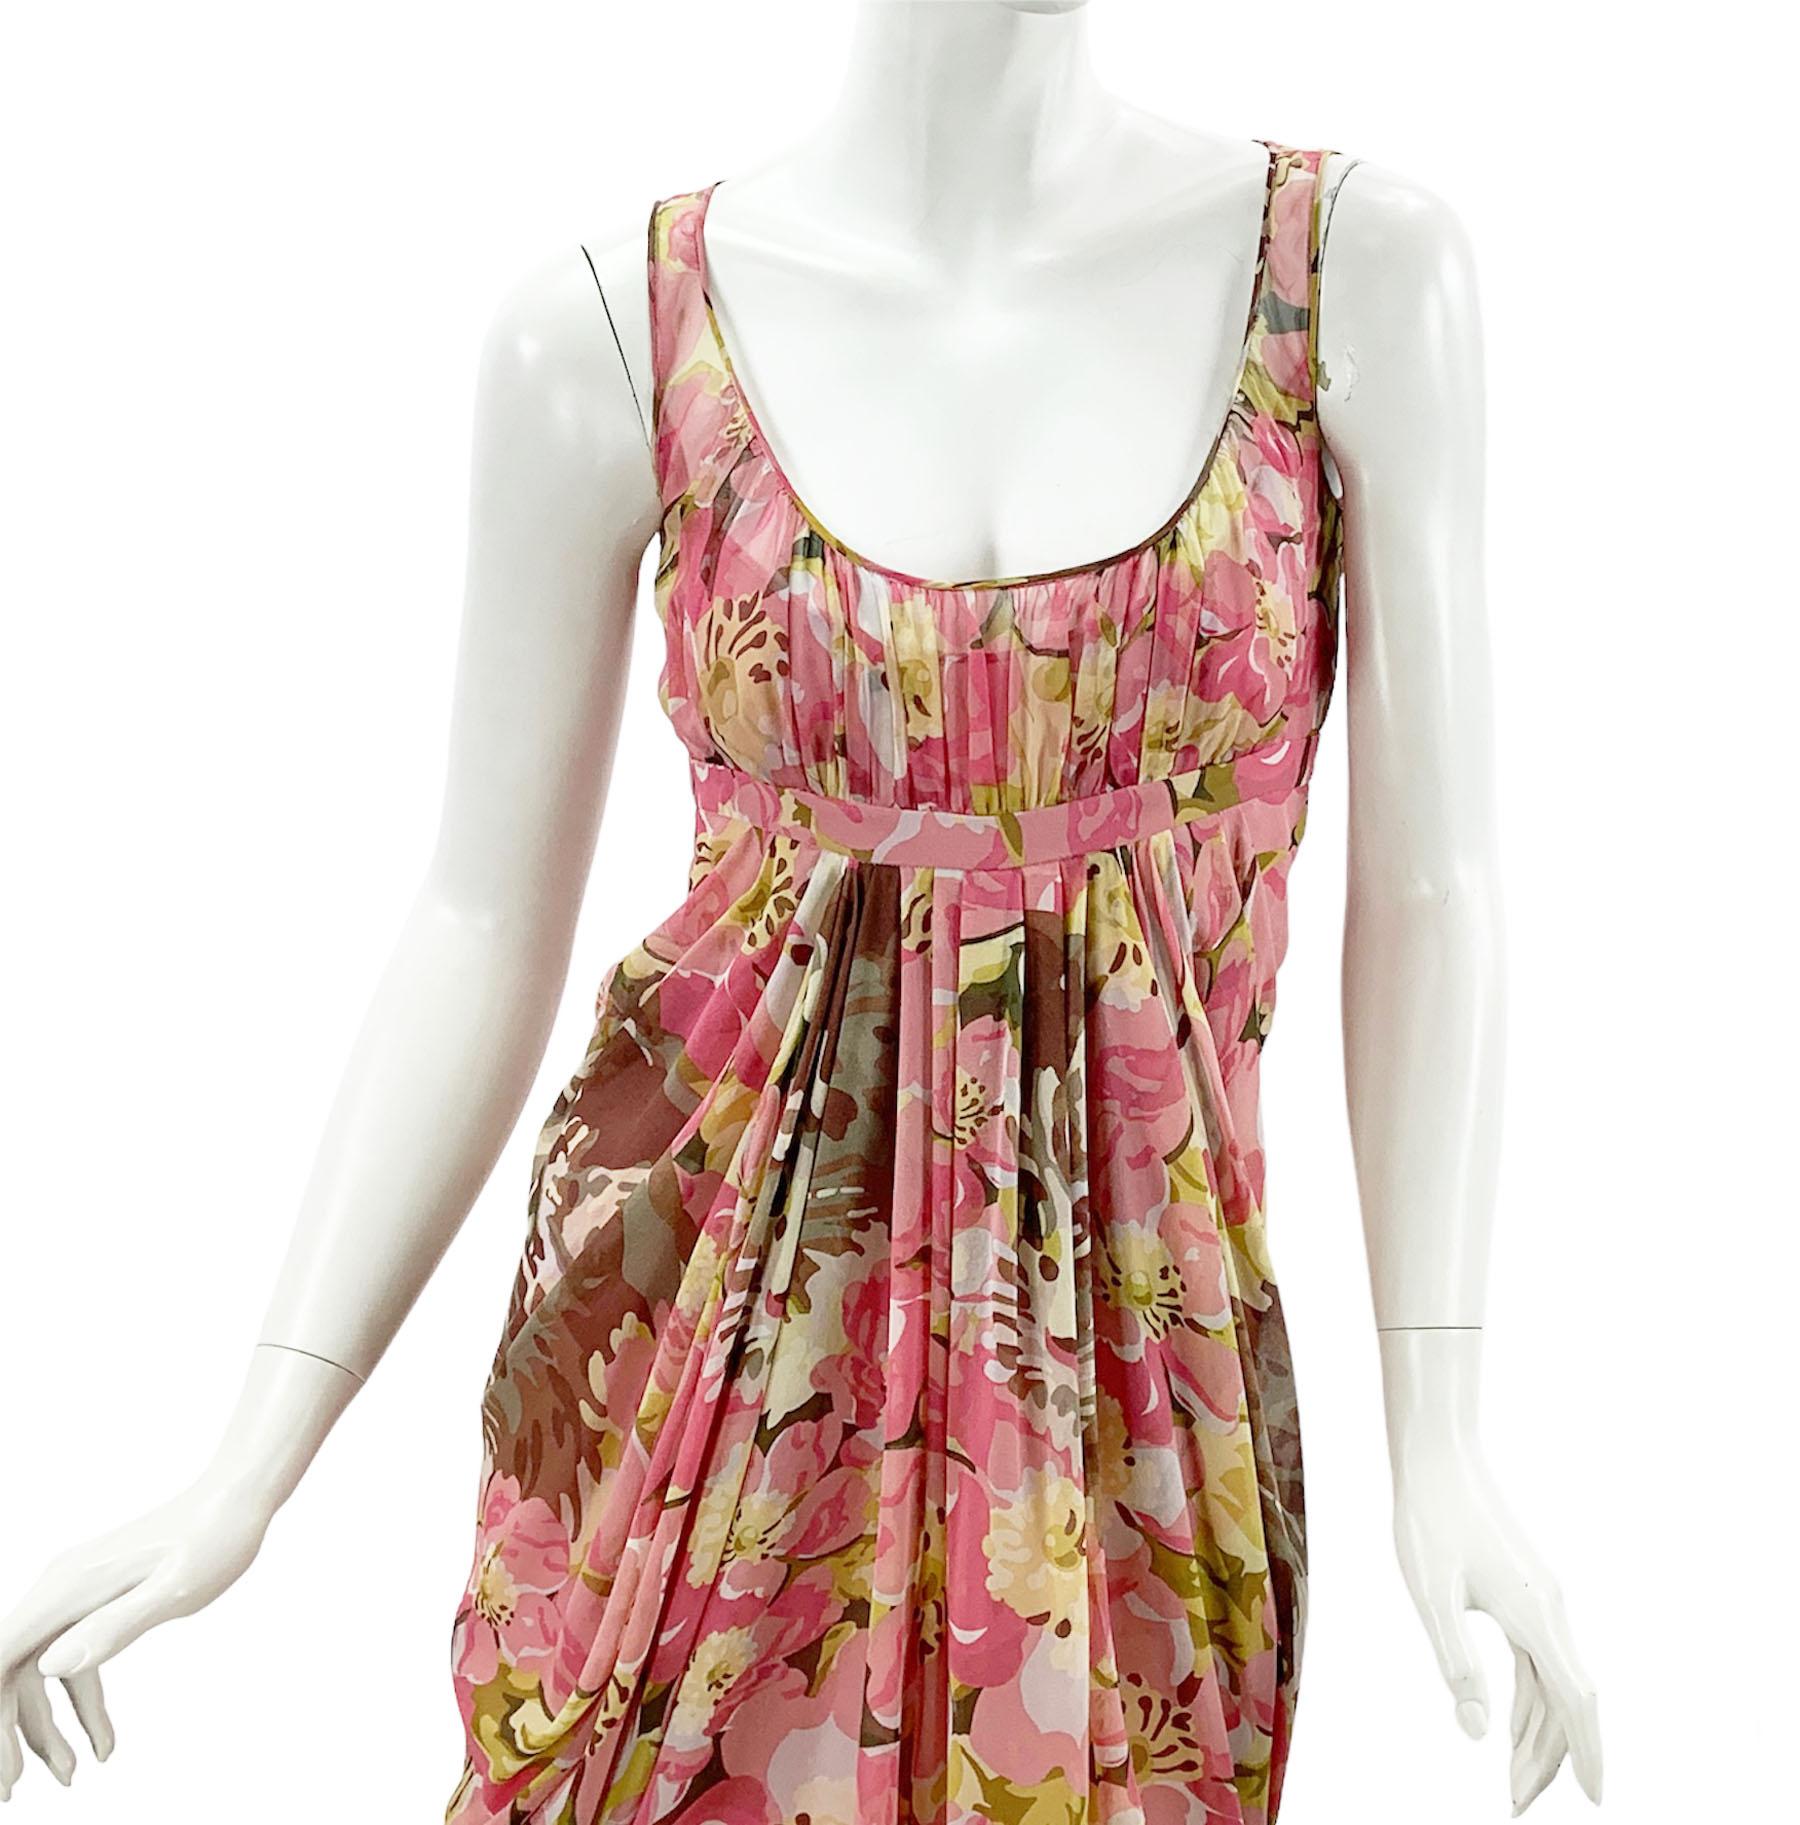 Vintage John Galliano Silk Floral Print Pleated Dress
French size 36 - US 4
2007 Collection
100% Silk dress and lining, Floral print, Pleated details, Empire waist, Fabric-covered button closure.
Measurements: Length - 40 inches, Bust - 32/34